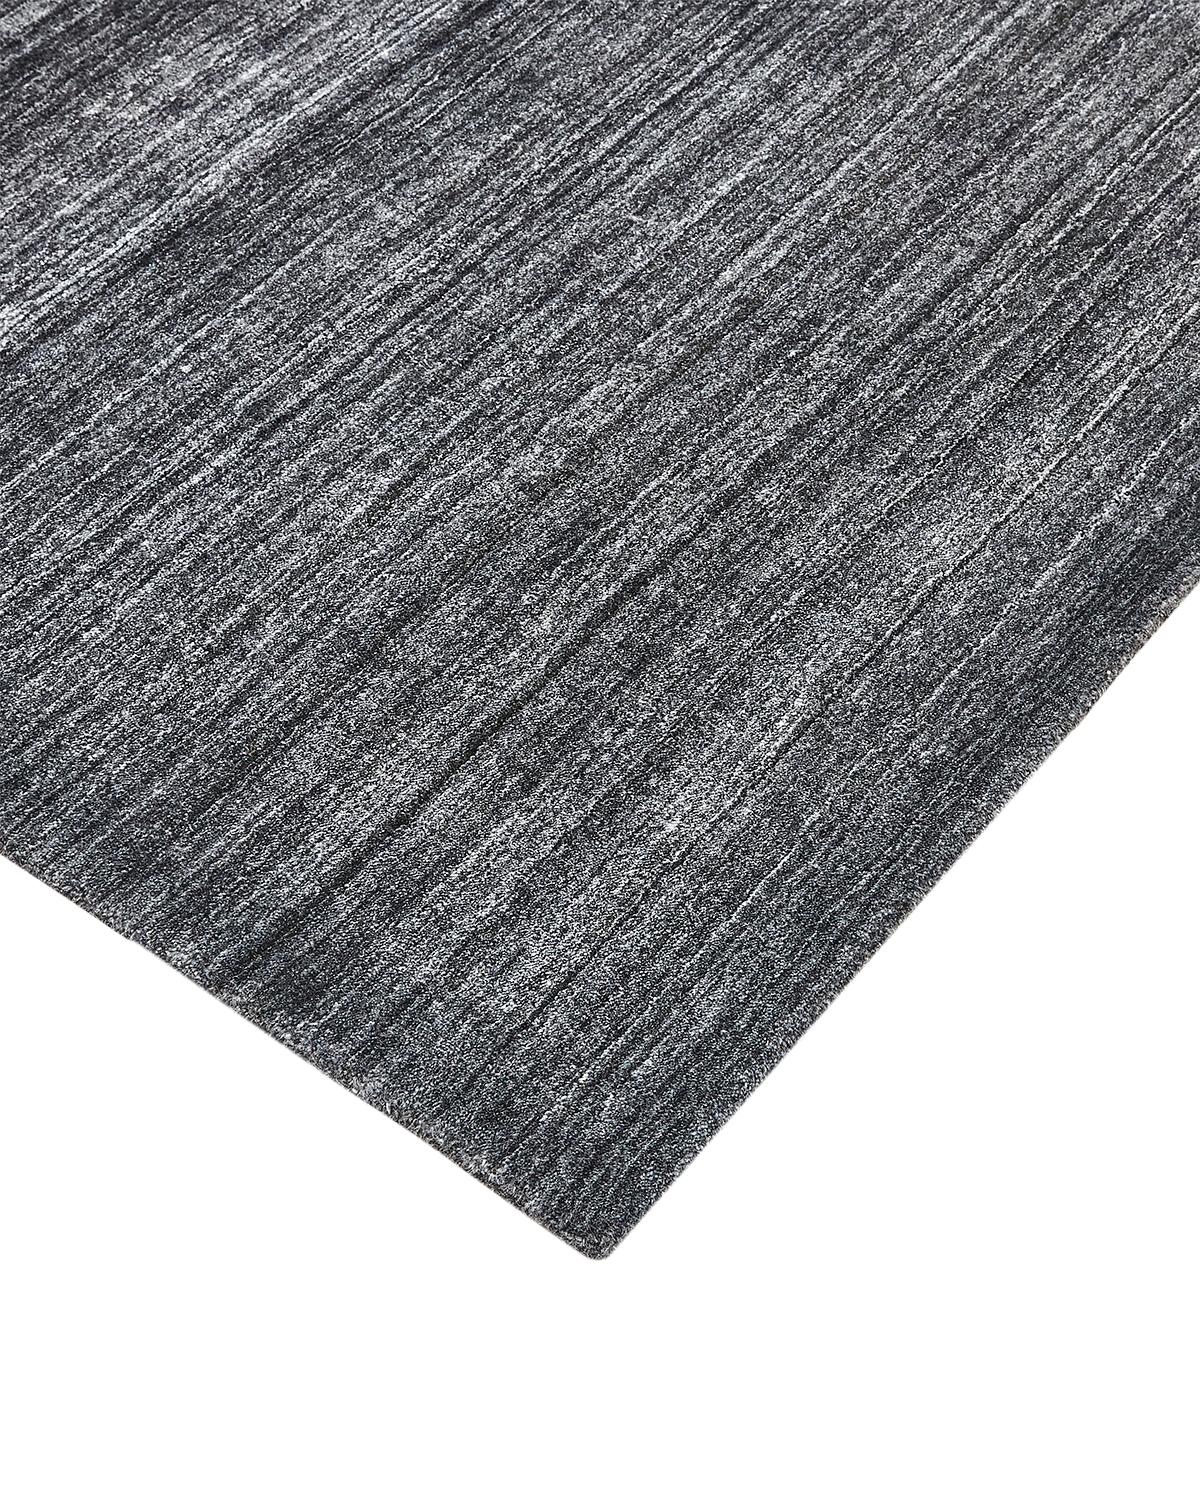 Subtle tone-on-tone stripes give the Solid collection a depth and sophistication all its own. These rugs can pull the disparate elements of a room into a beautifully cohesive whole; they can also introduce an unexpected but welcome jolt of color